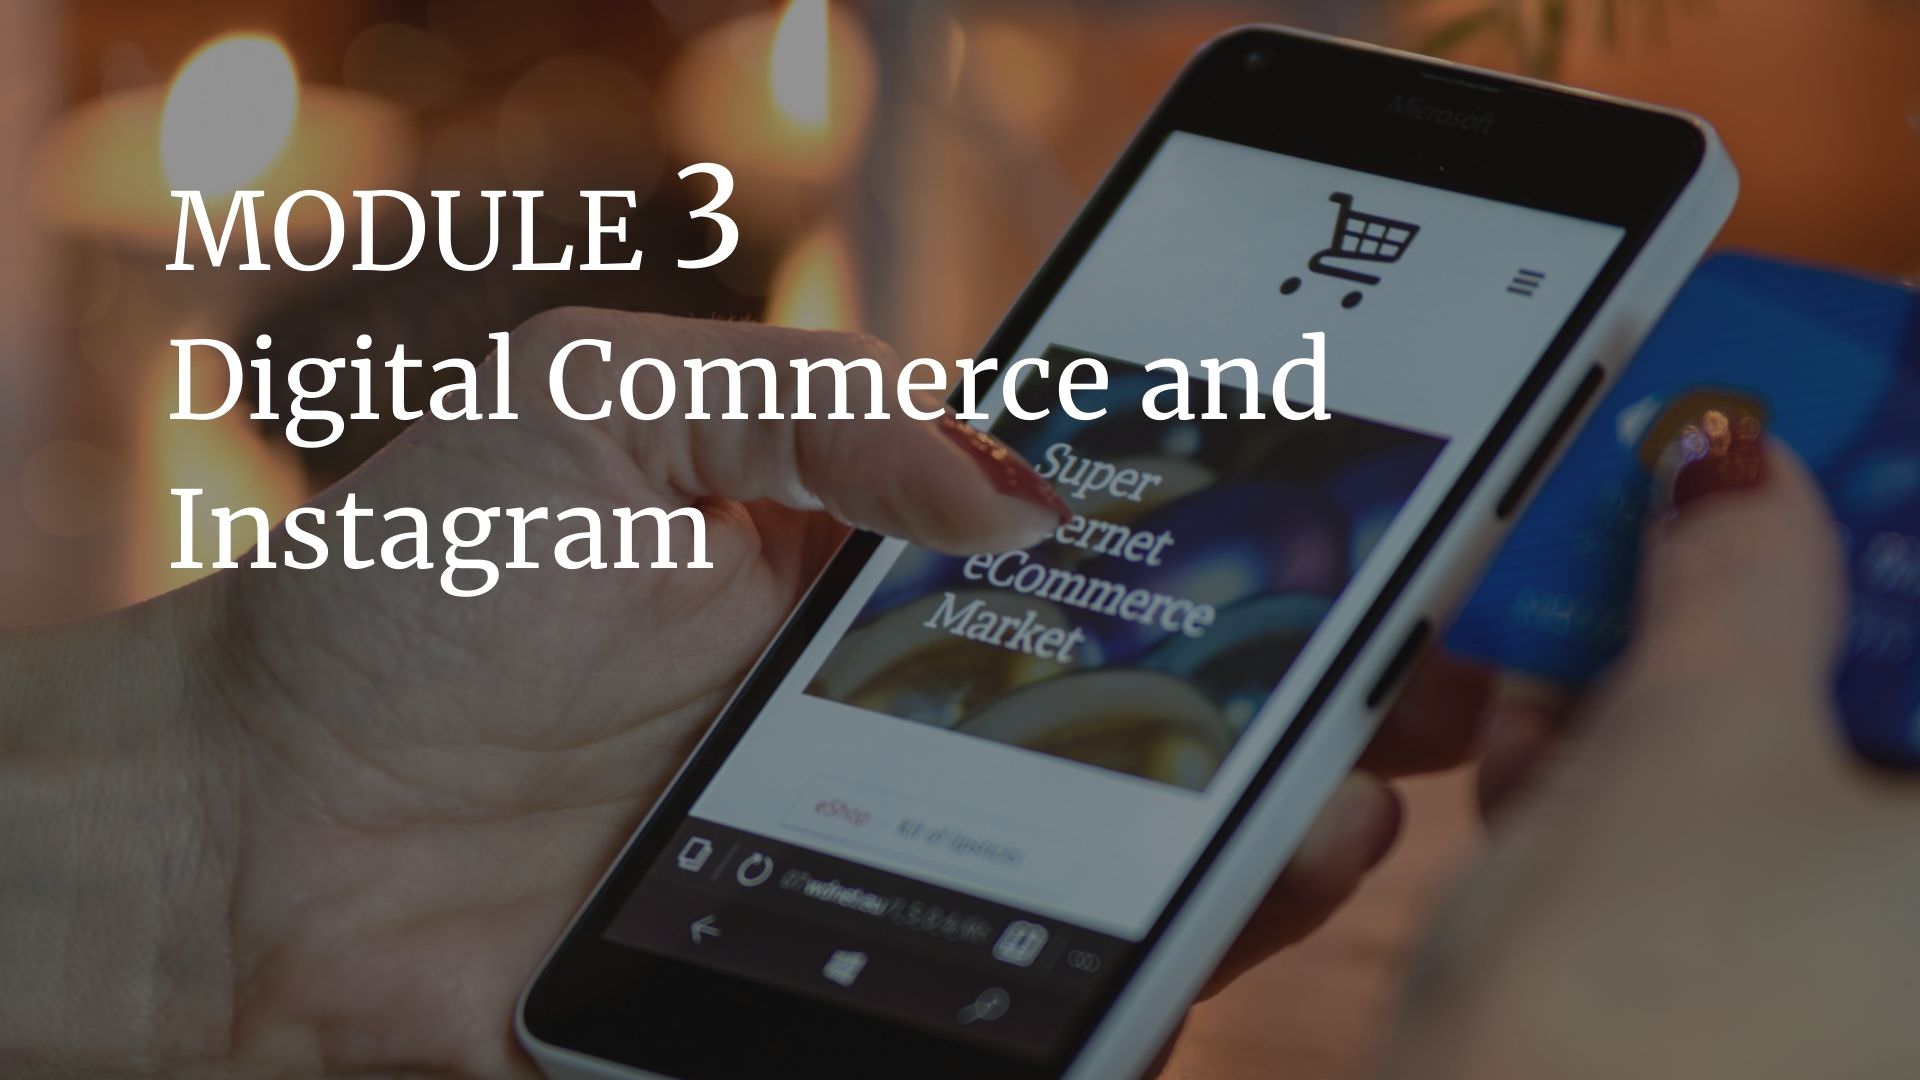 The best way to use ecommerce and digital commerce on Instagram